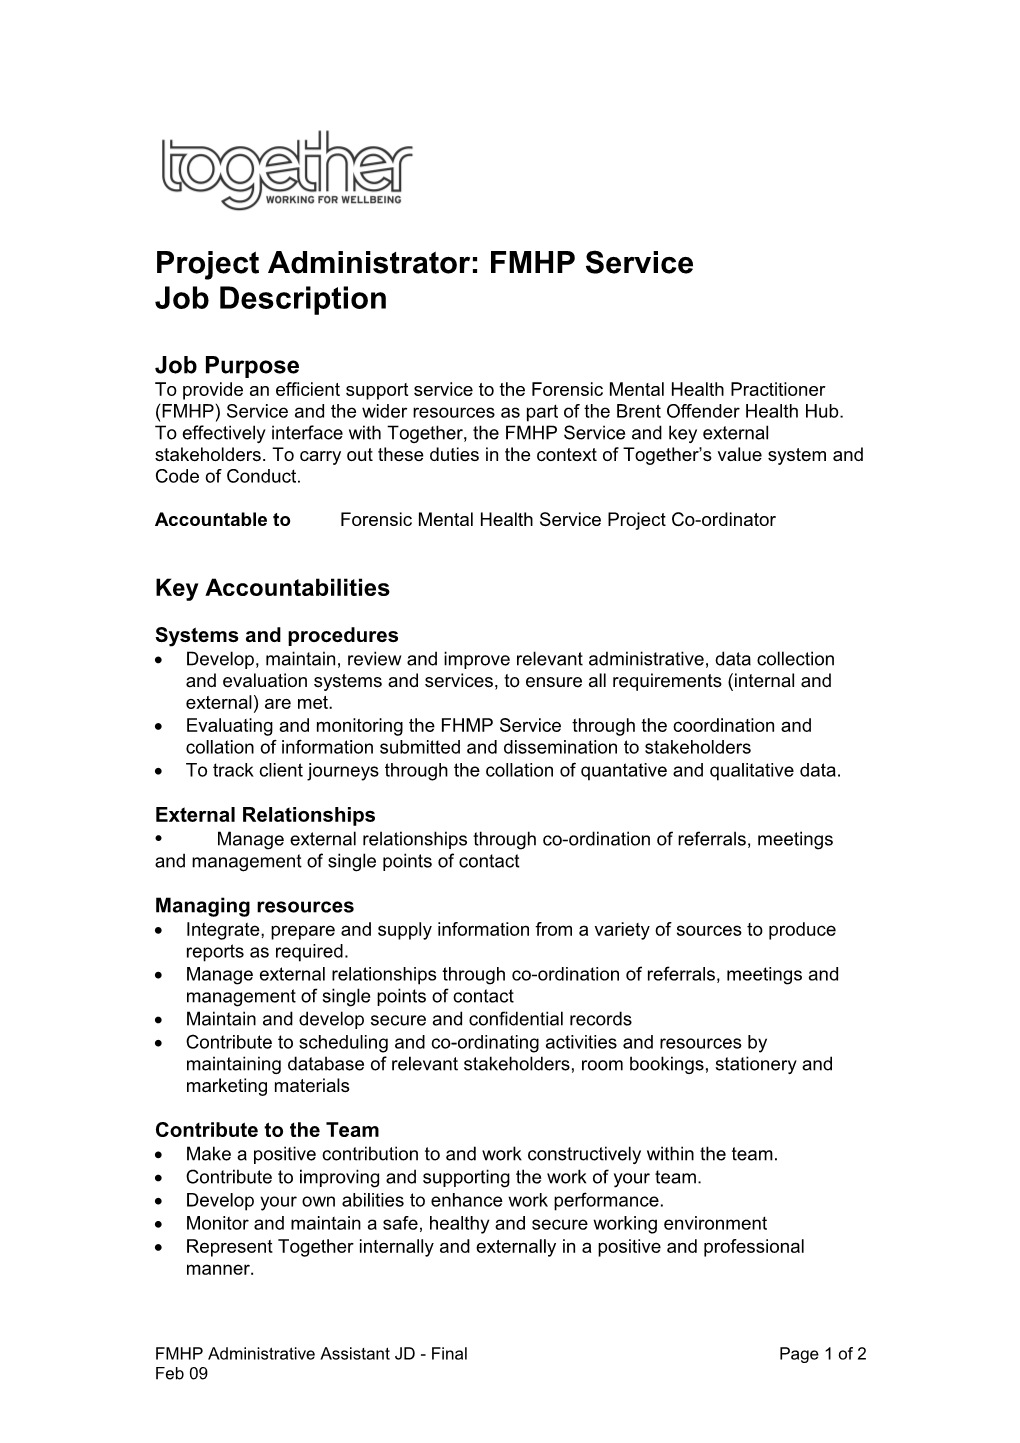 Project Administrator: FMHP Service